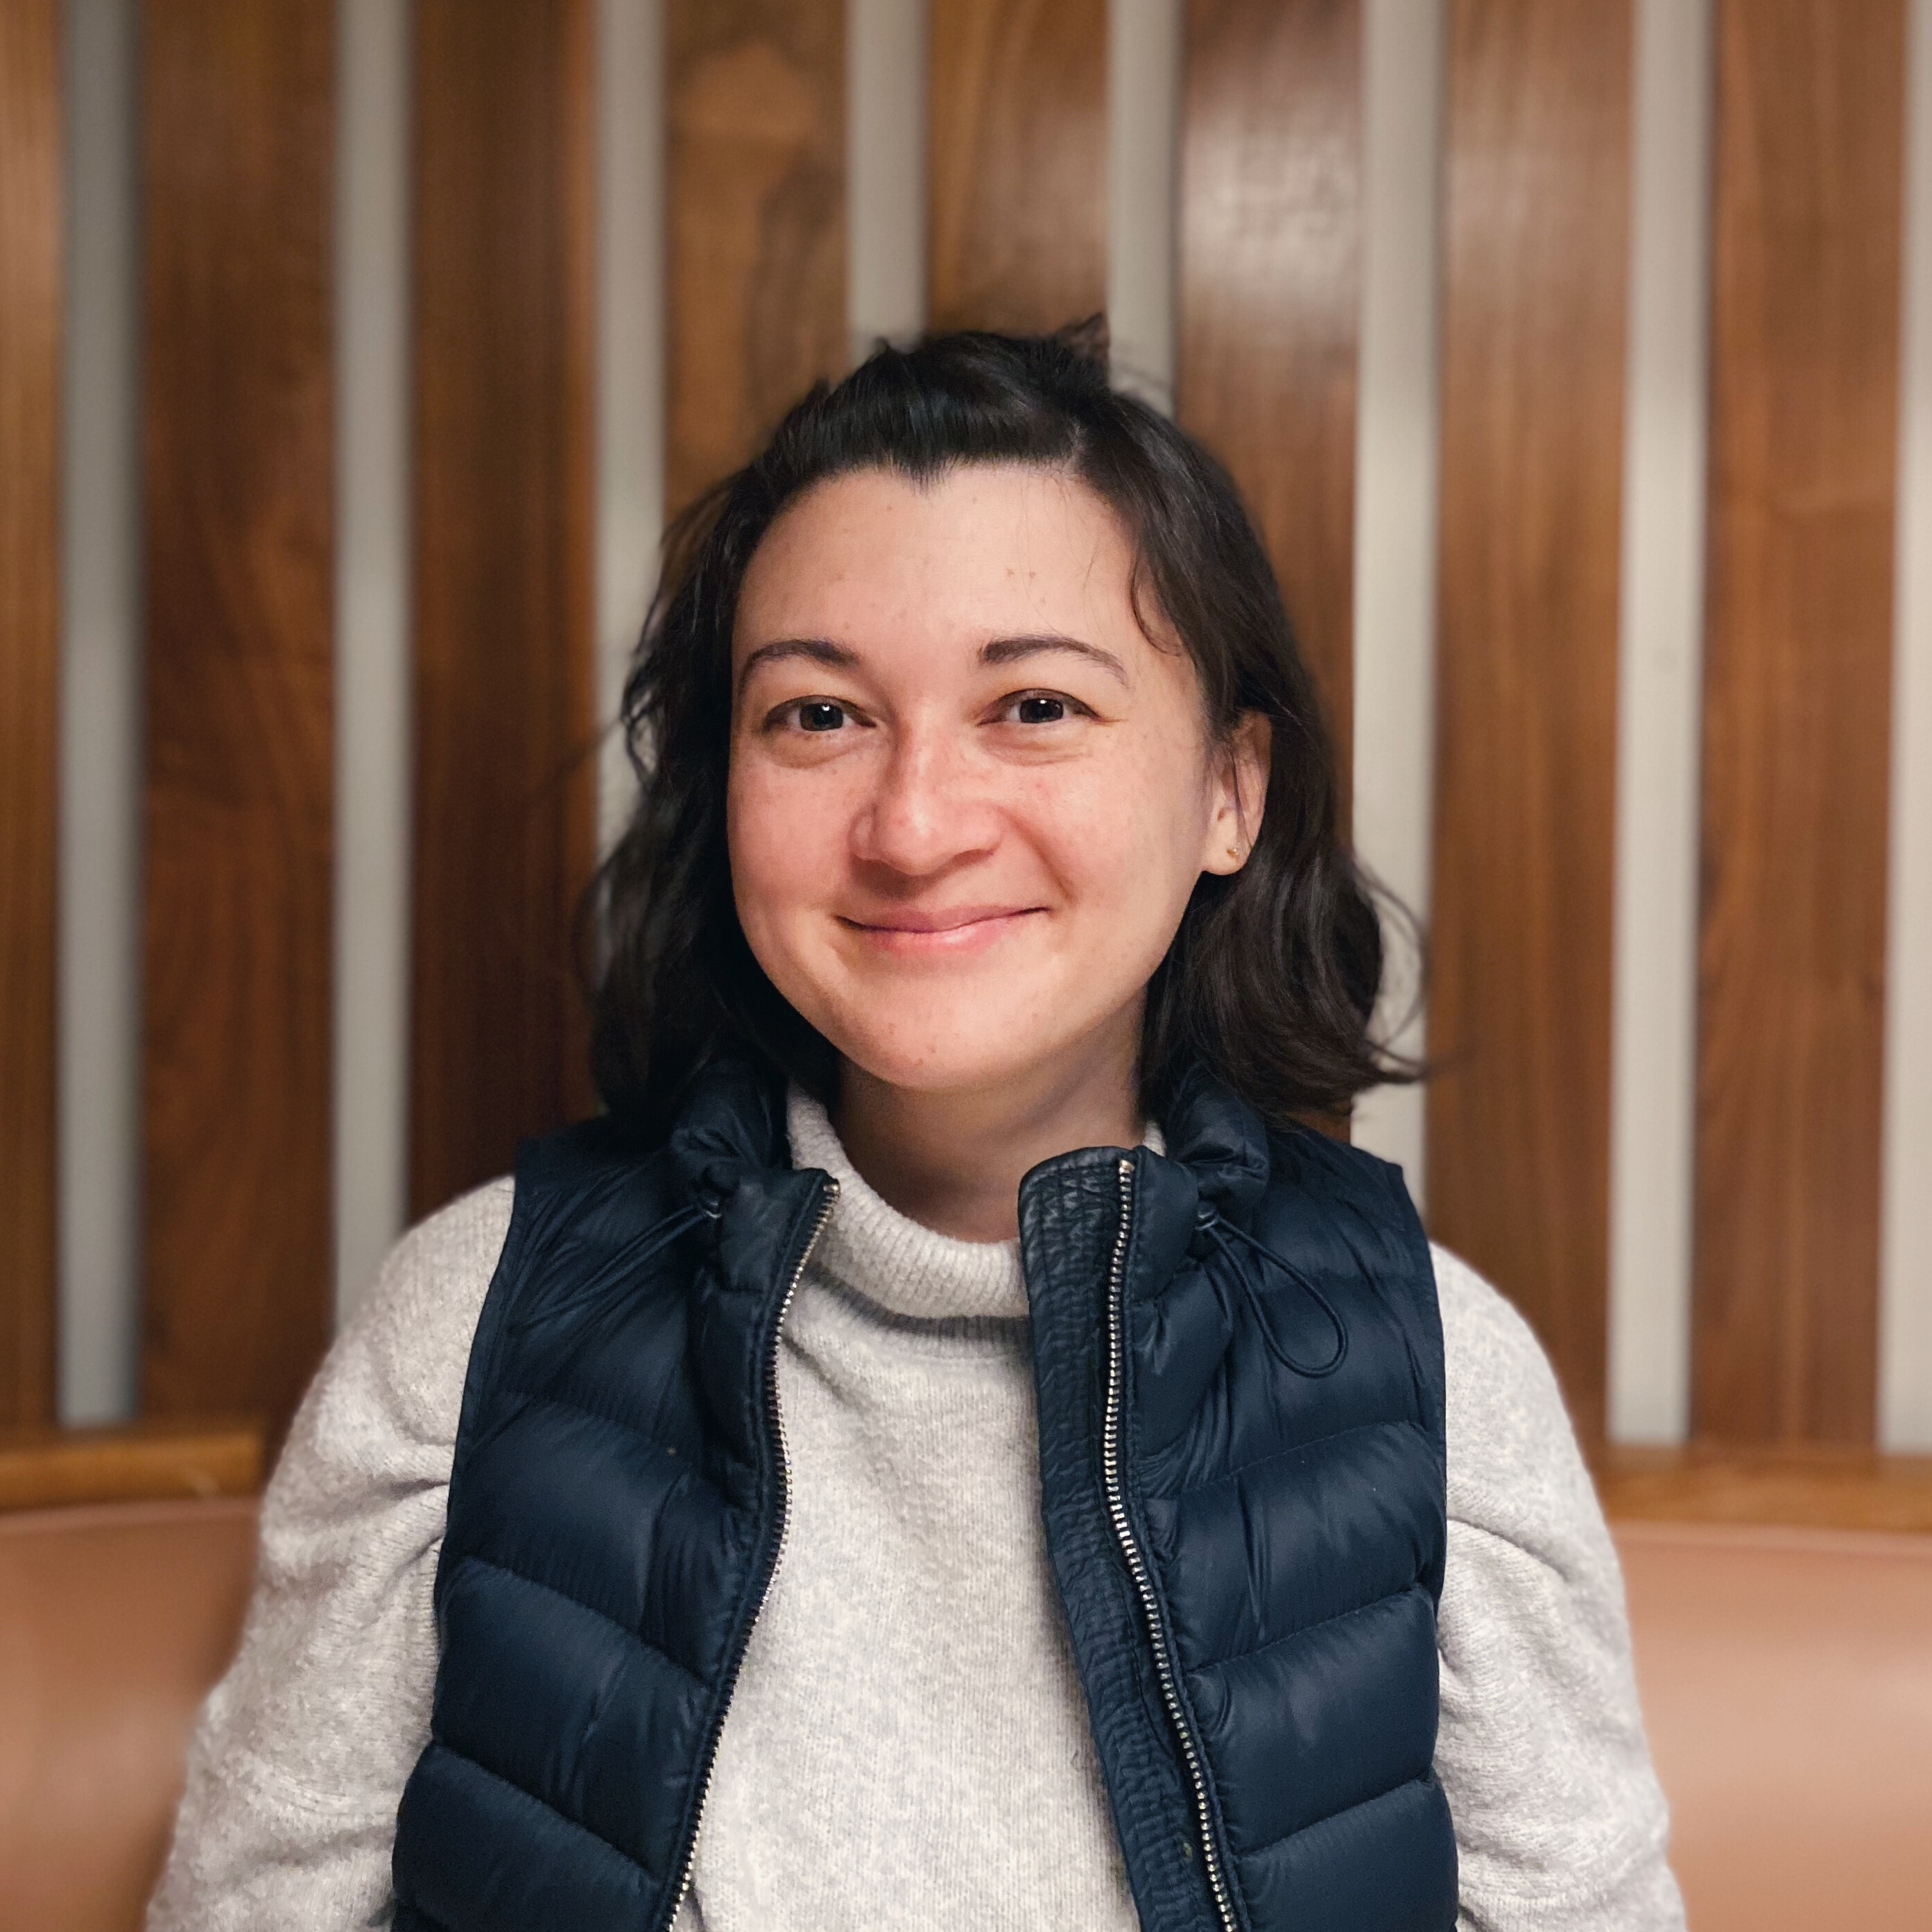 Becca sits in a booth with wood slats behind her. She is wearing a navy vest and grey sweater, and smiling.